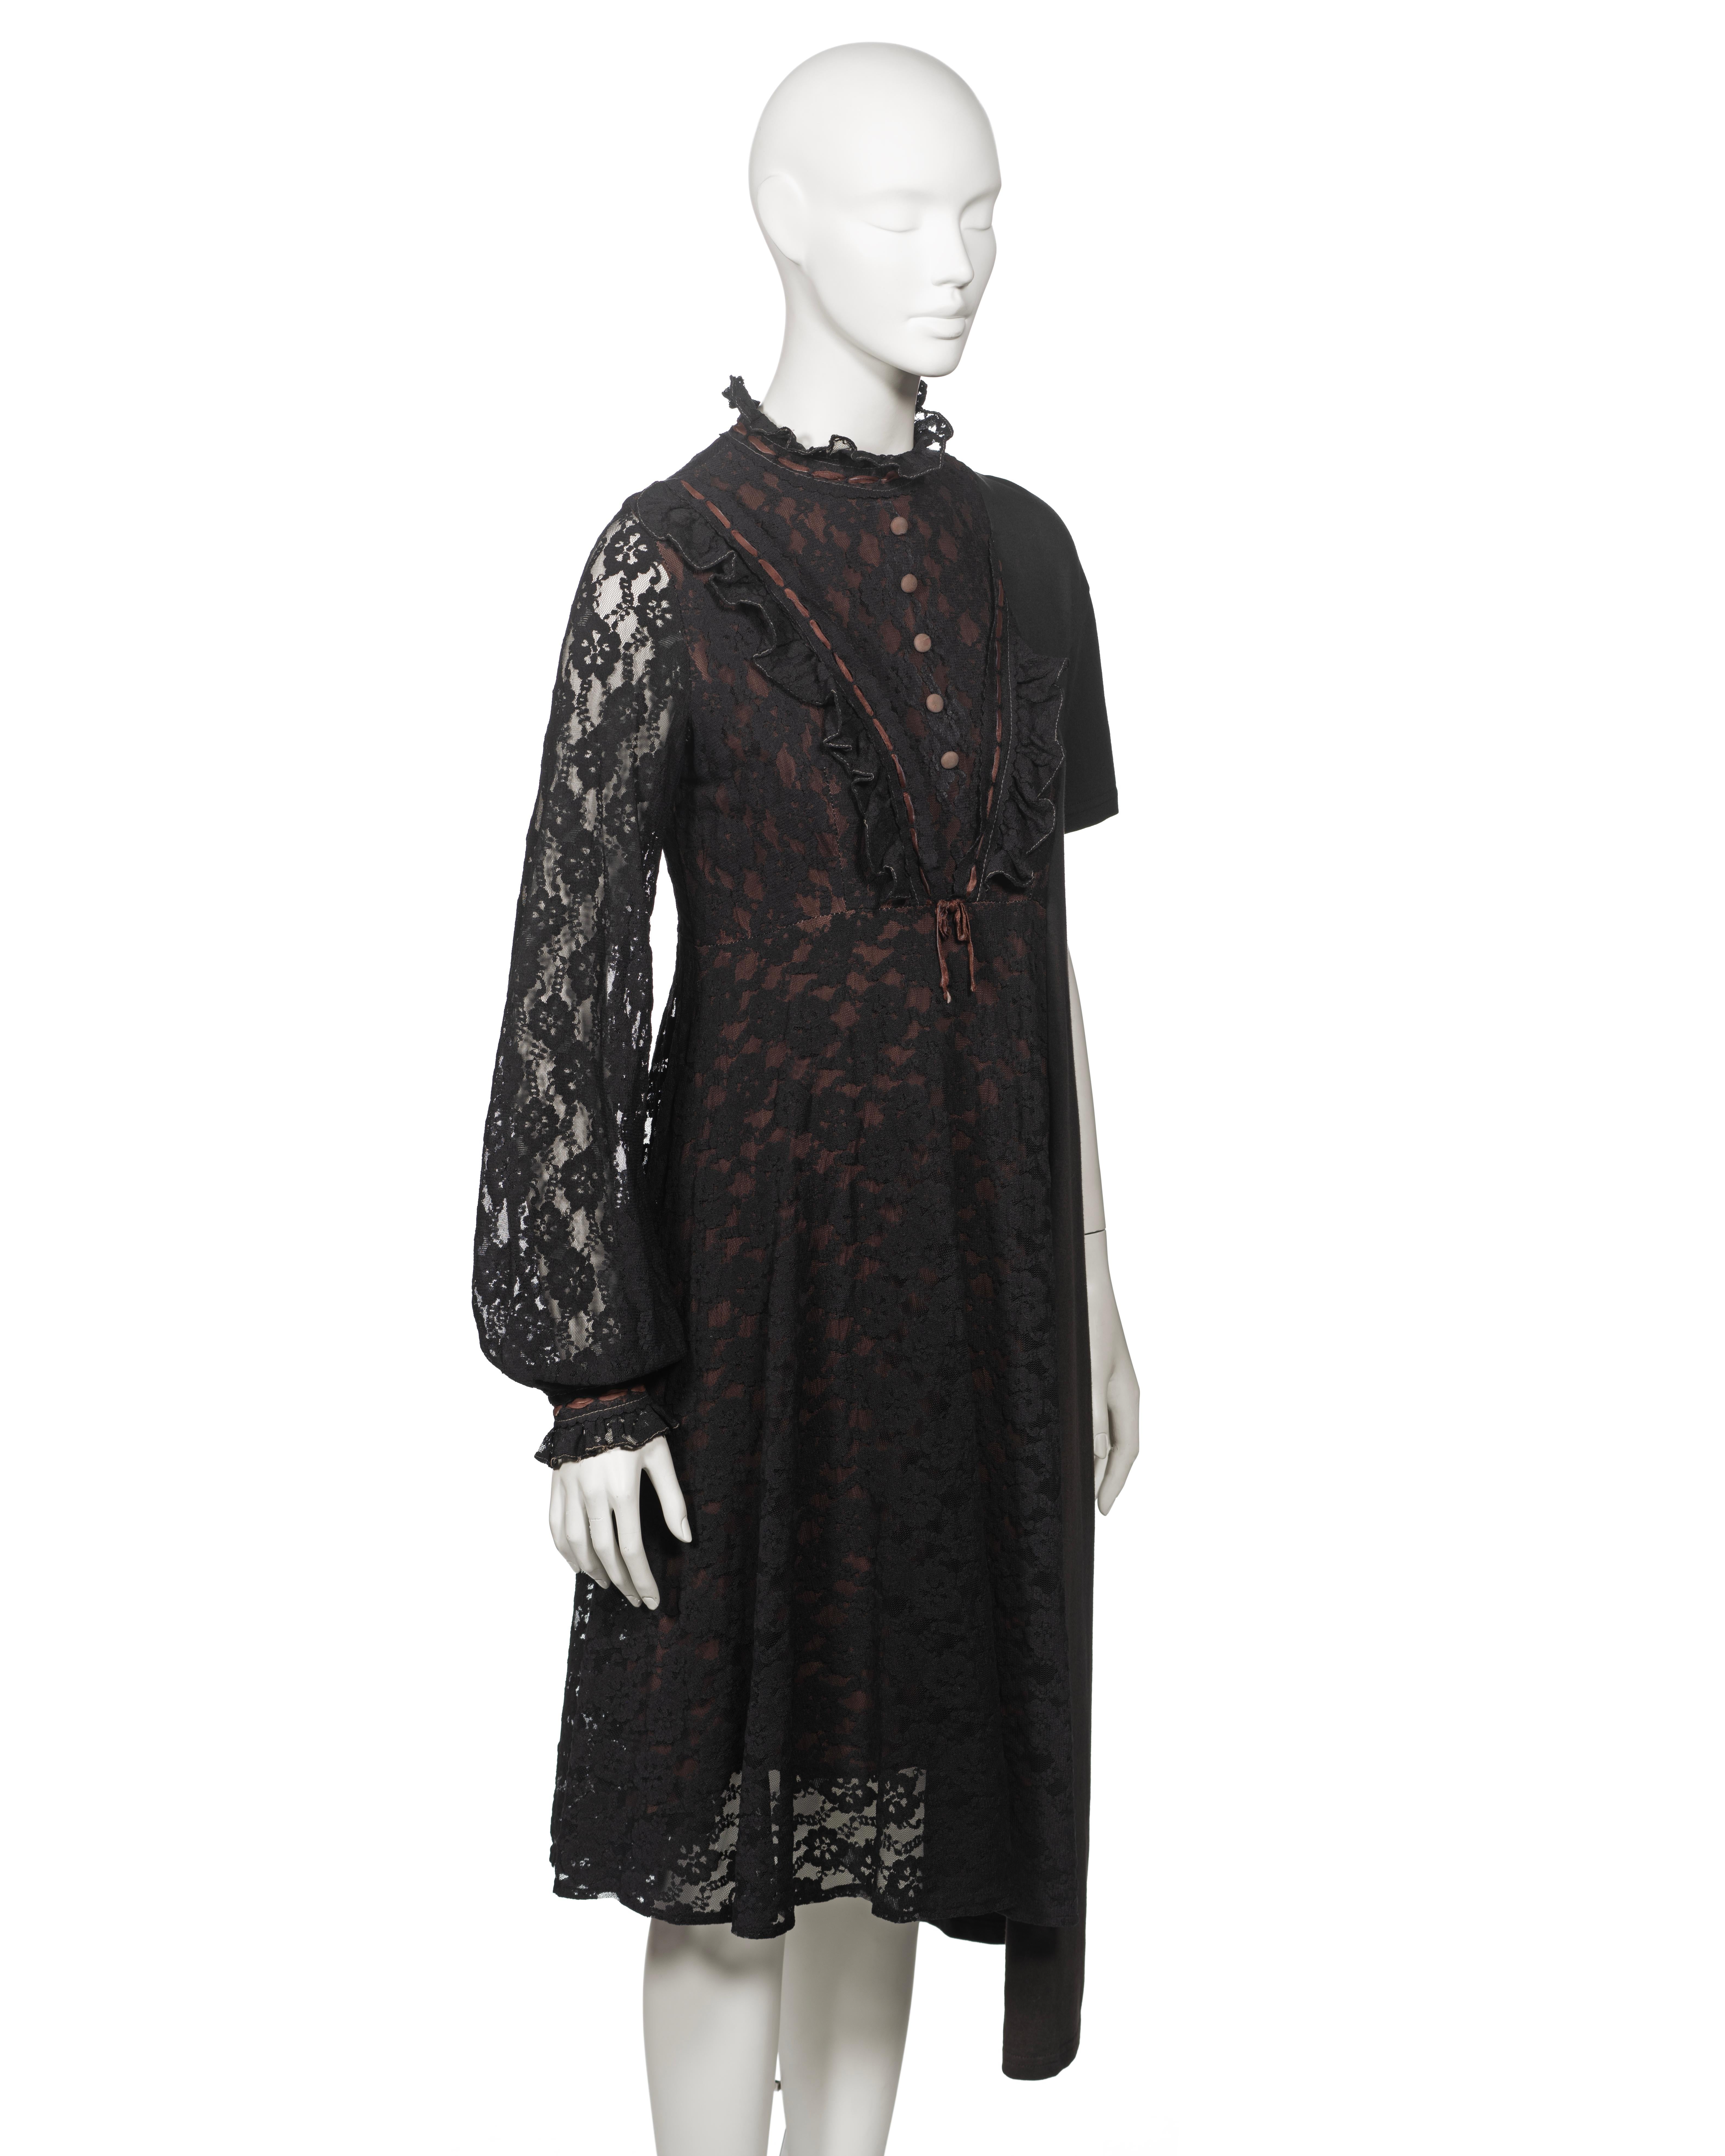 Martin Margiela Artisanal Dress Made From Two Vintage Dresses, fw 2003 For Sale 1